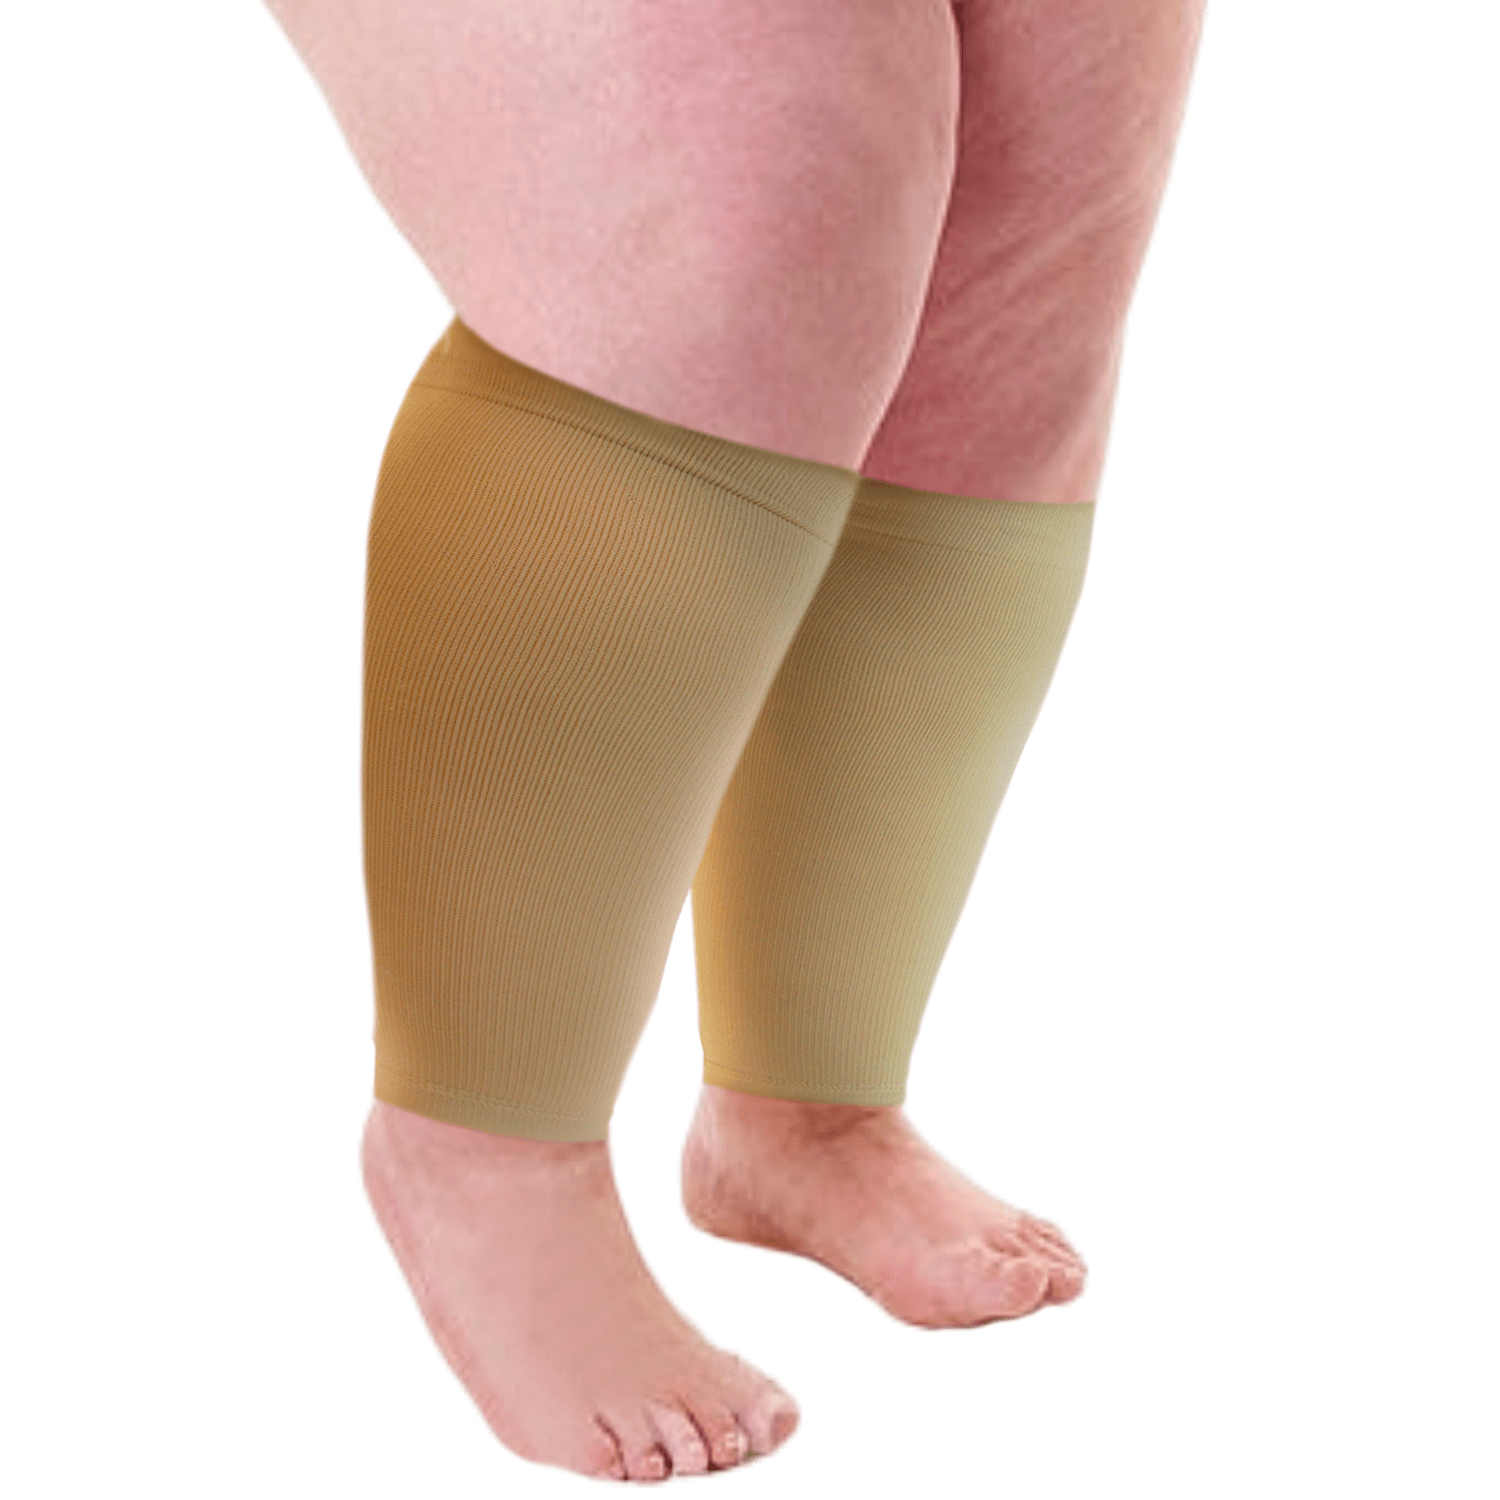 NEW BIG TALL Calf Sleeve With Zipper 20-30 mmHg Compression Extra Wide Shin  Energize Leg Swelling Circulation (Beige, XXX-Large)